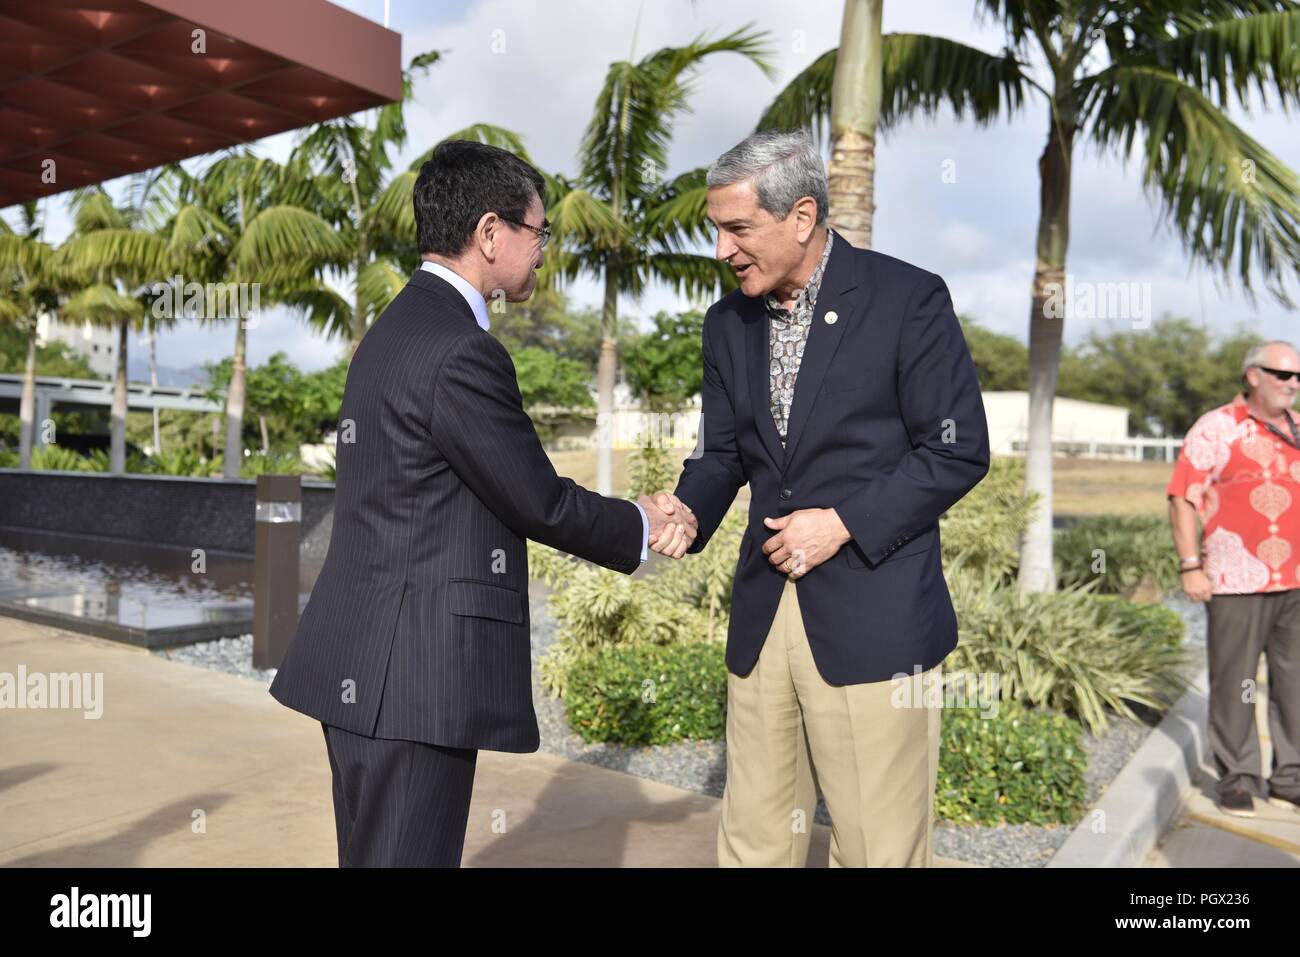 Foreign Minister of Japan Taro Kono shaking hands with Defense POW/MIA Accounting Agency (DPAA) director Kelly McKeague at Joint Base Pearl Harbor-Hickam, Hawaii, August 22, 2018. Image courtesy Tech. Sgt. Kathrine Dodd / Defense POW/MIA Accounting Agency. () Stock Photo